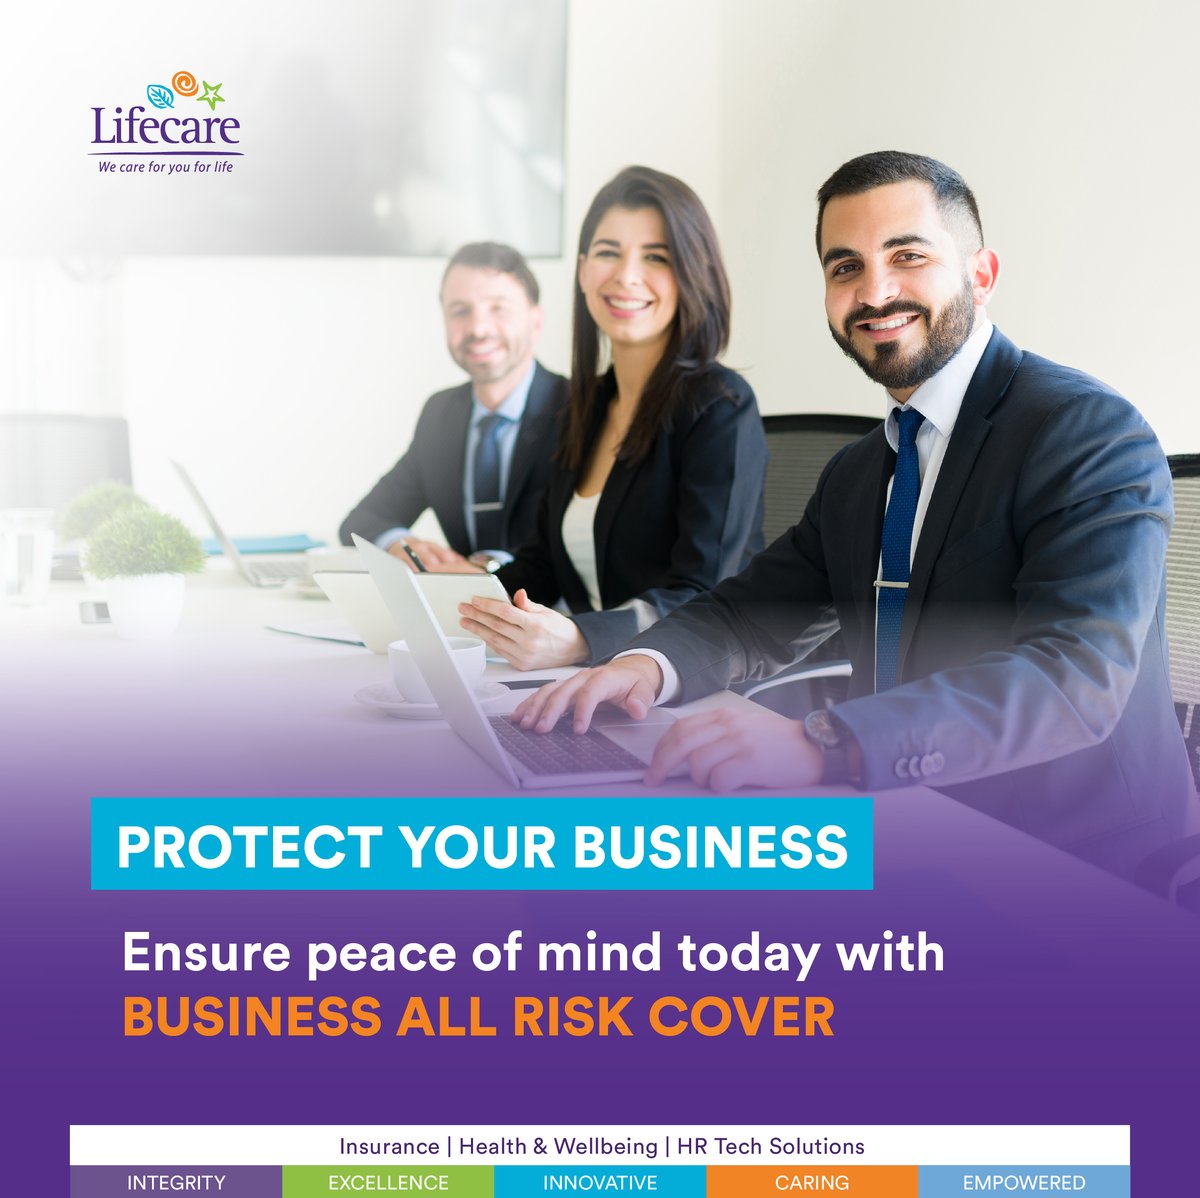 Unexpected challenges are part of the business landscape. Business All Risks insurance is essential in navigating these uncertainties, protecting you against numerous risks. ​

Want to protect your business but don't know where to start? Get in touch.
#BusinessInsurance